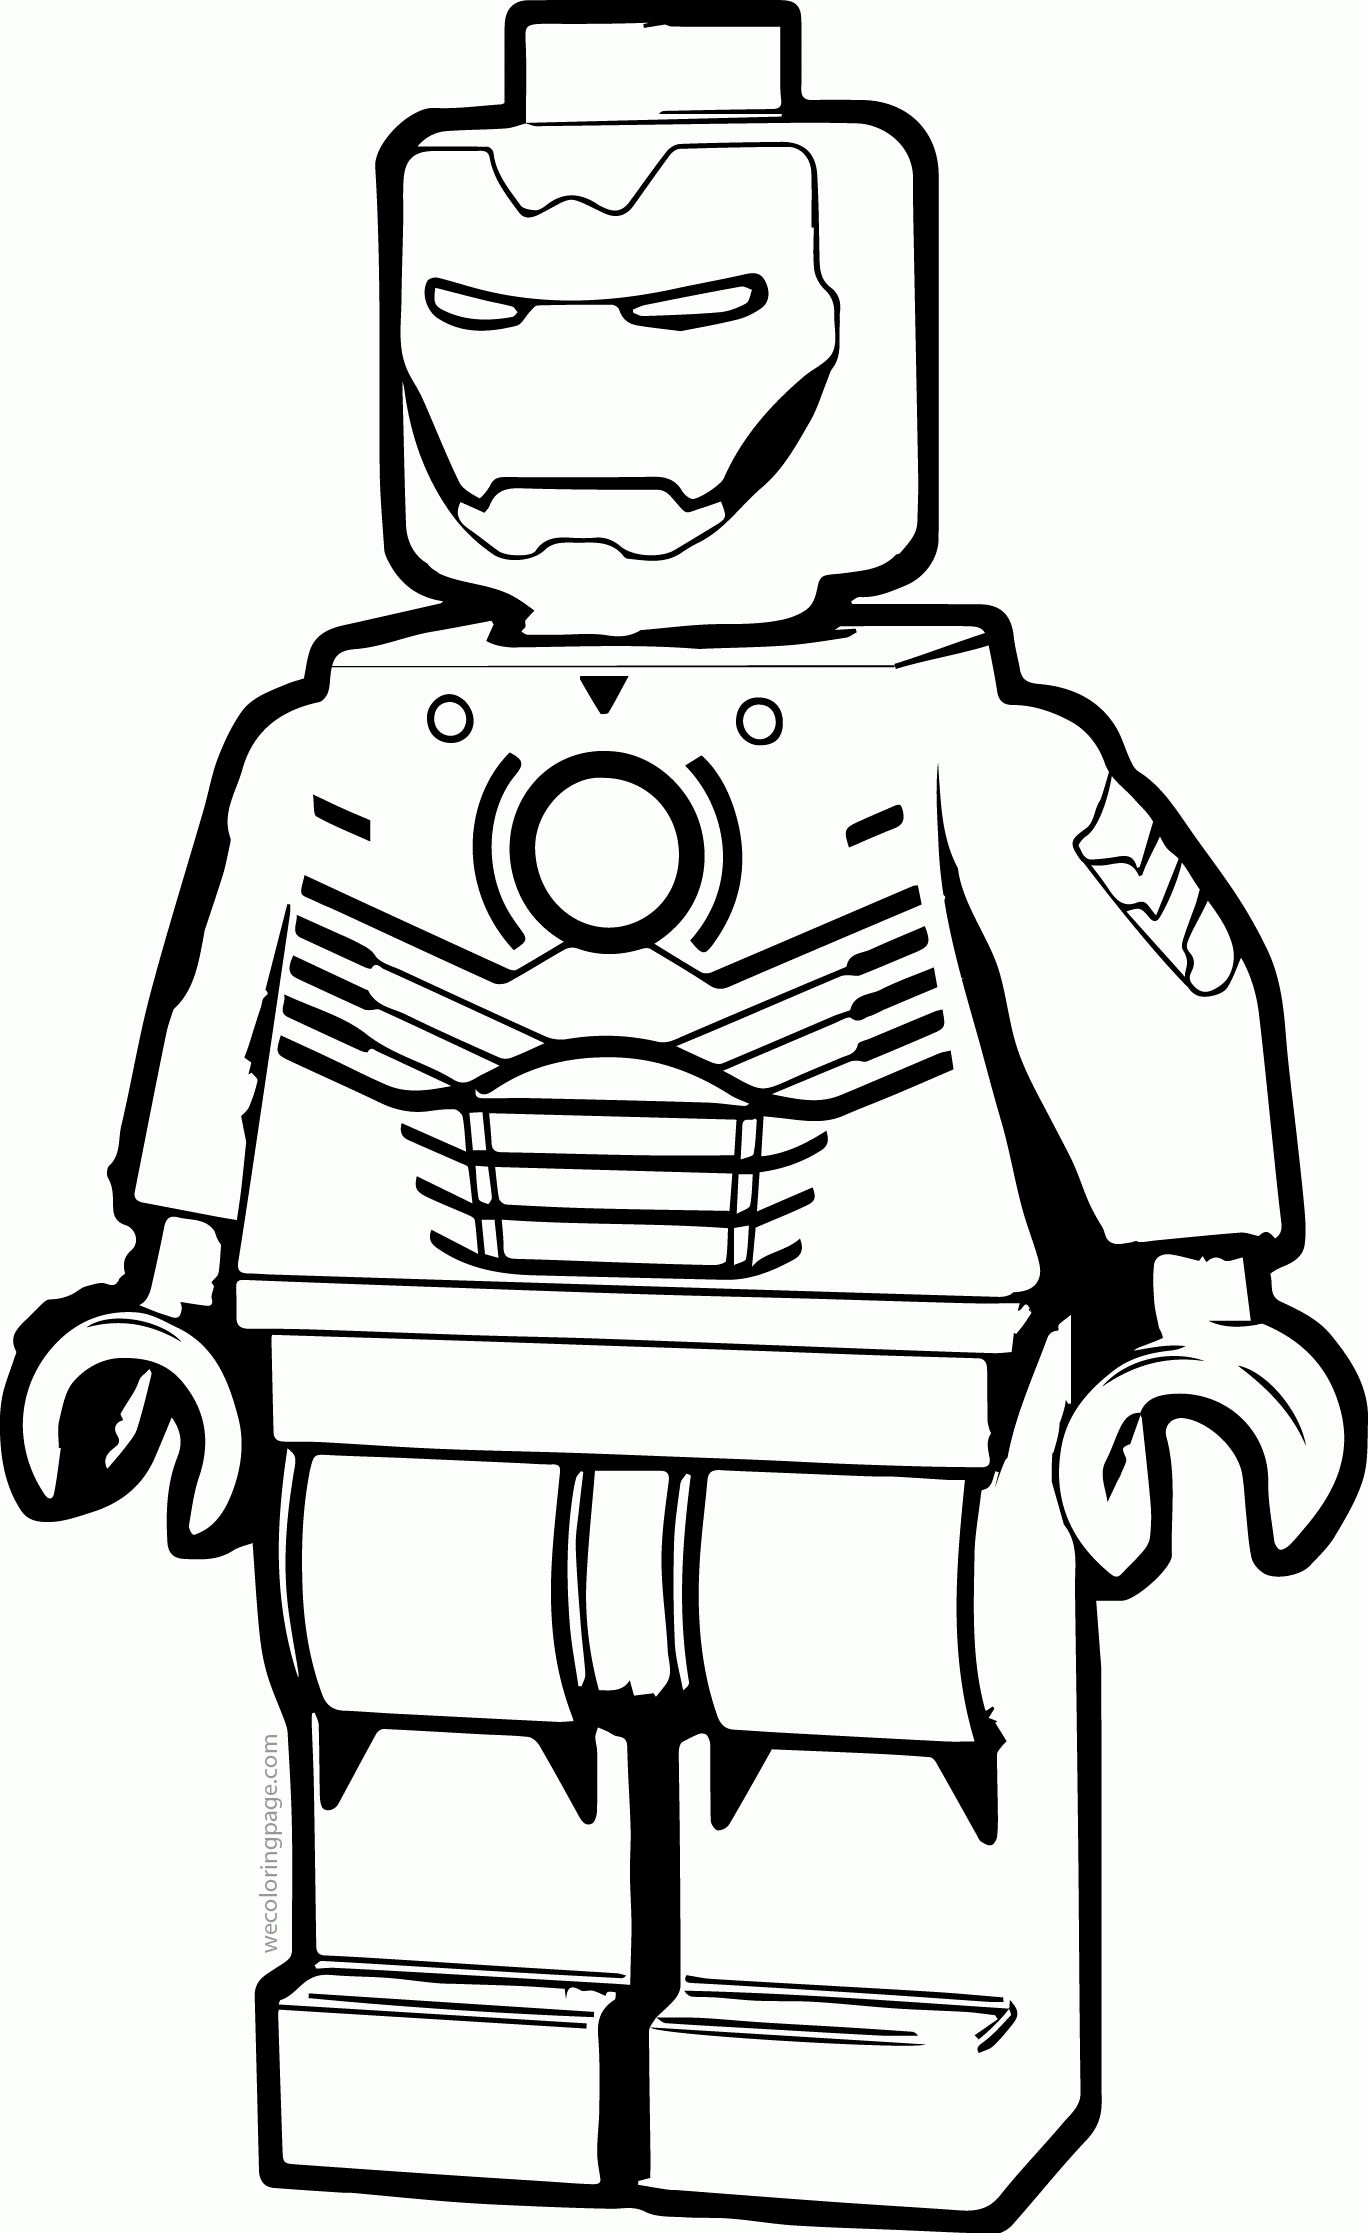 Iron is an essential component of hemoglobin, an erythrocyte (red blood cell) protein that transfers oxygen from the lungs to the tissues  1 . Dibujos De Lego Iron Man Para Colorear